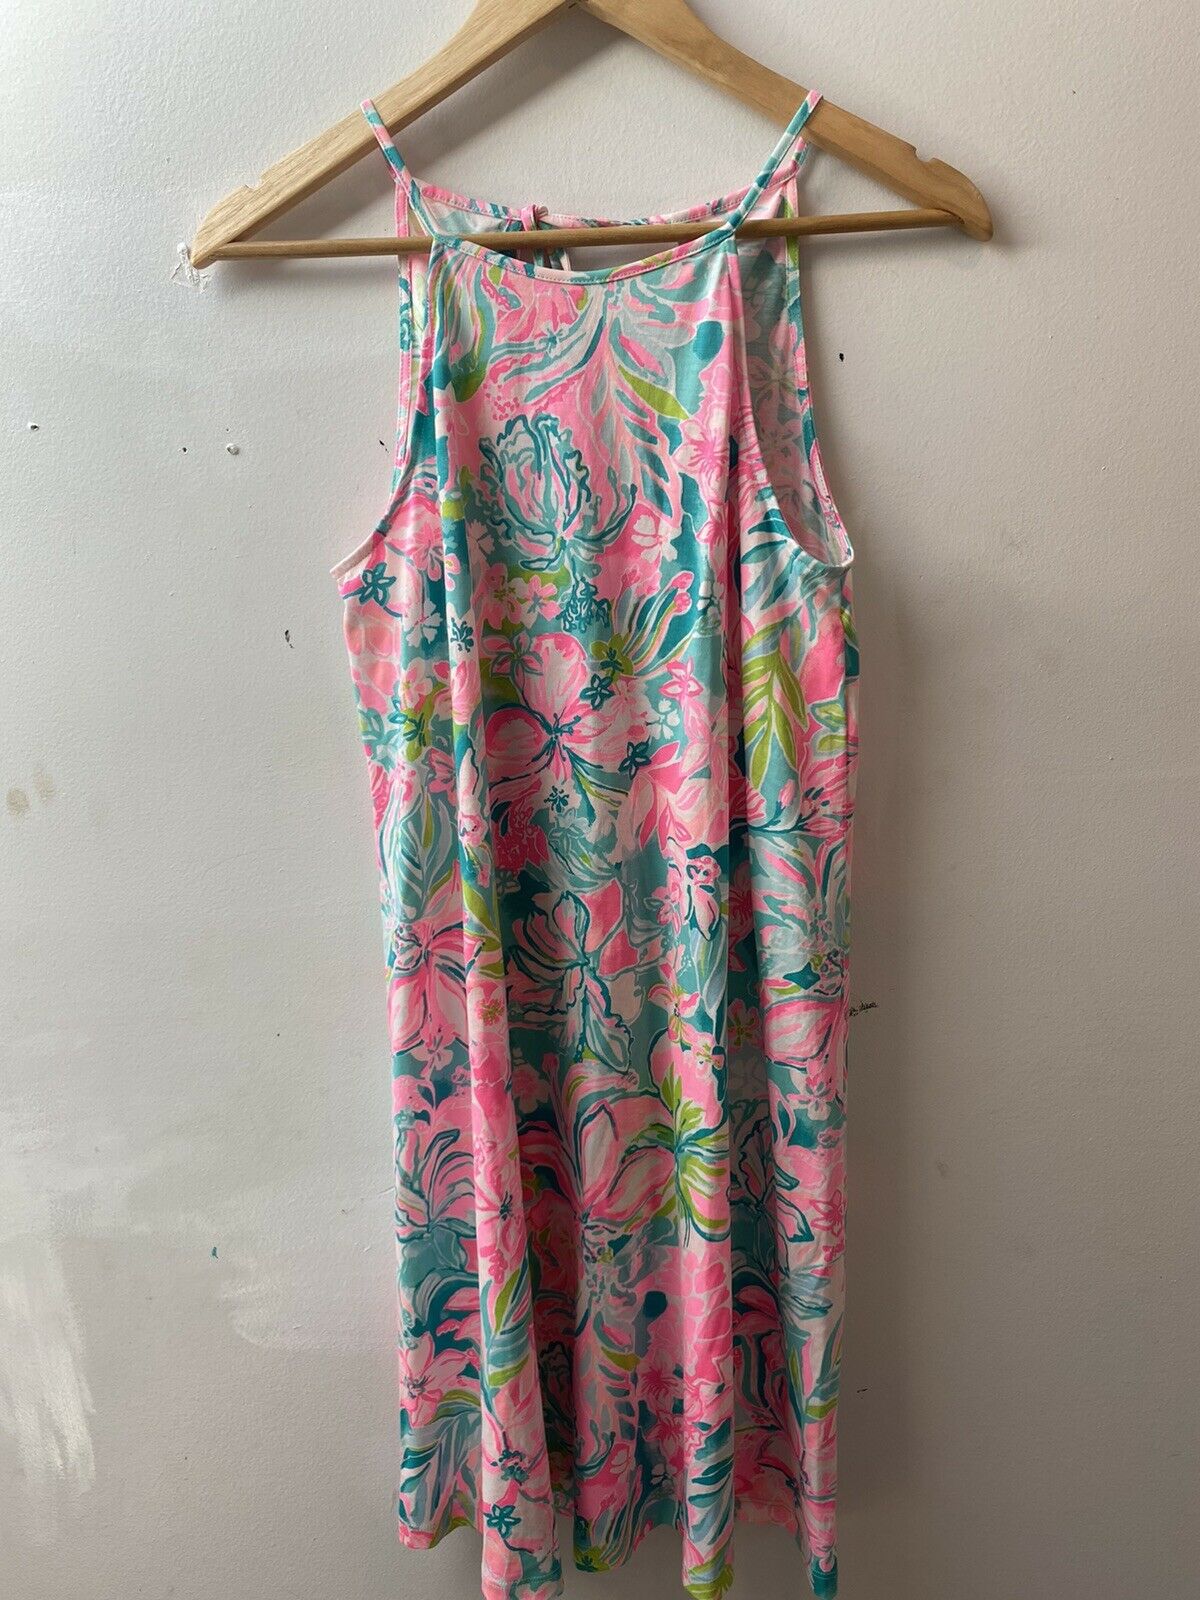 NWT! Lilly Pulitzer  Pink Printed dress XS